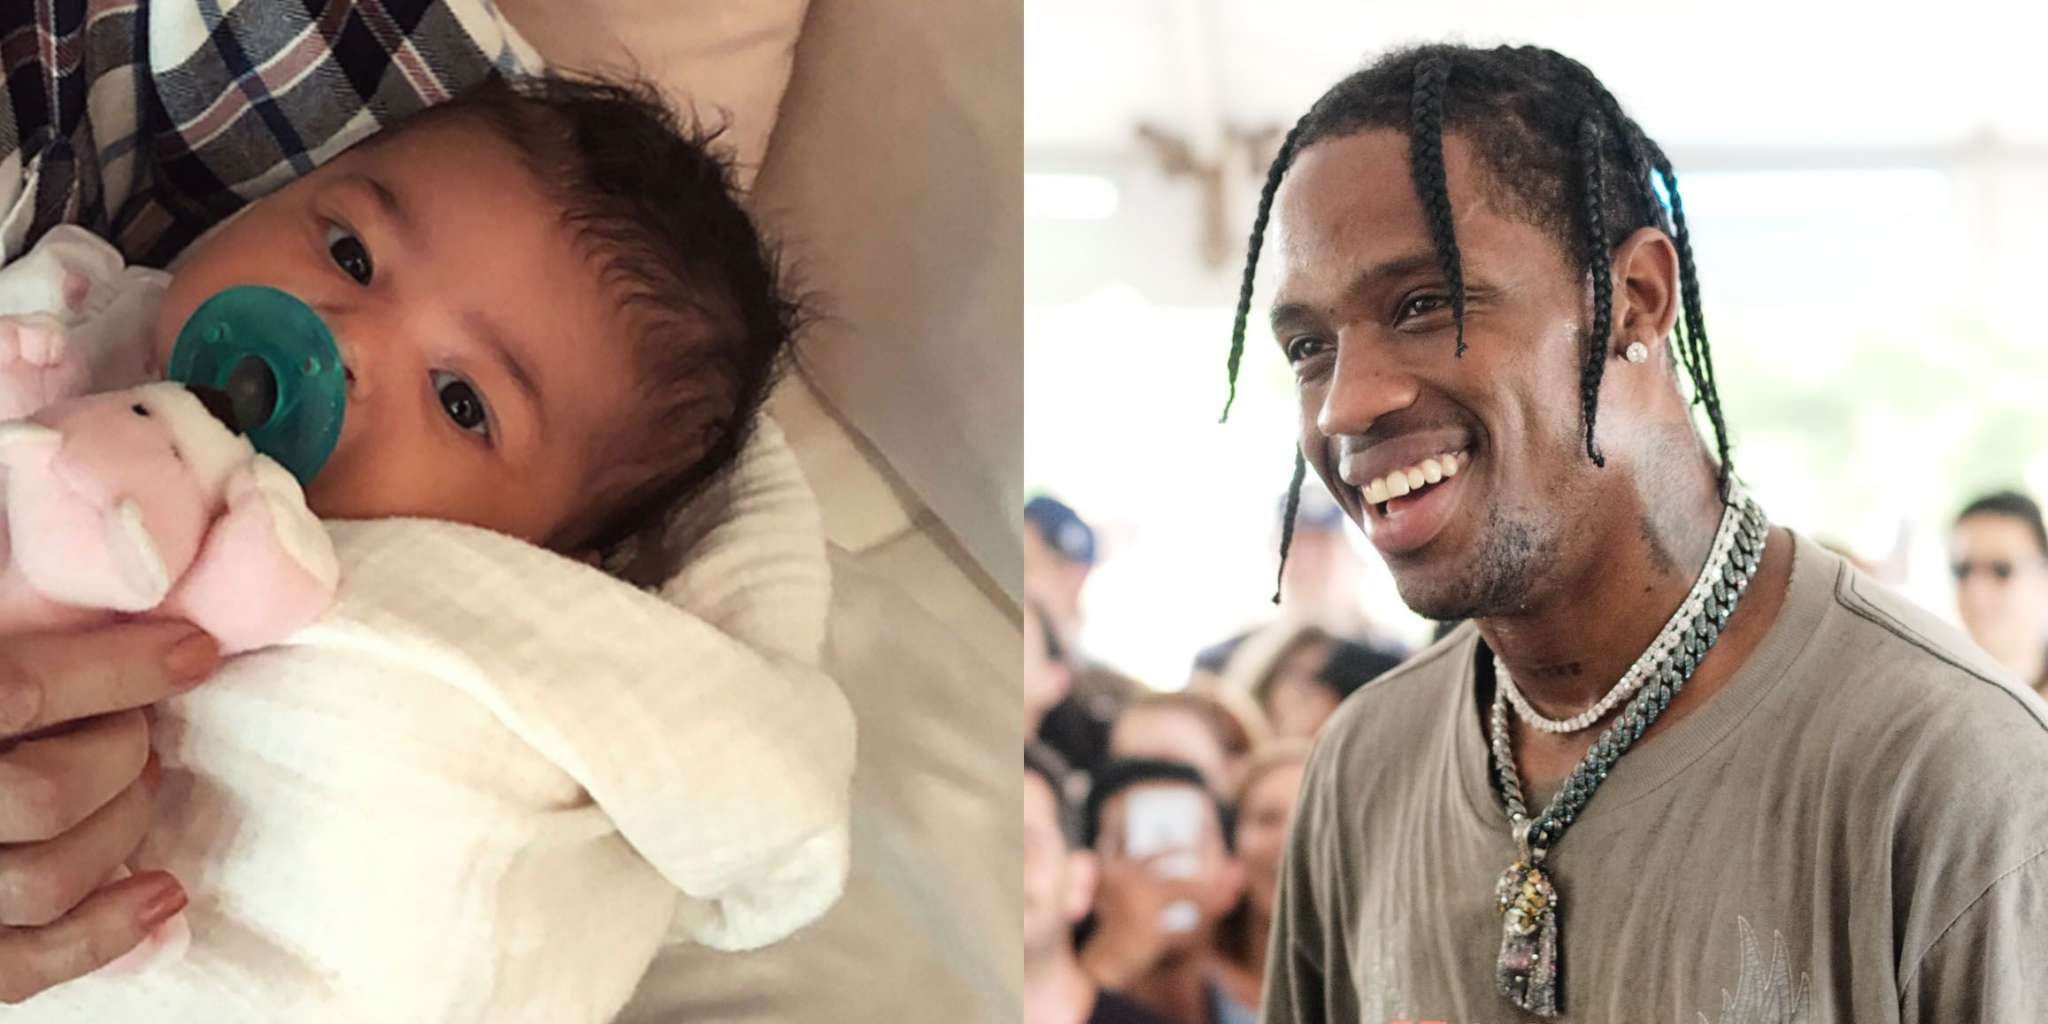 Kylie Jenner Shares The Sweetest Video With Travis Scott And Their Daughter And Fans Are Relieved They Are Together - The Makeup Mogul Also Paid Her Respects To Nipsey Hussle's Family